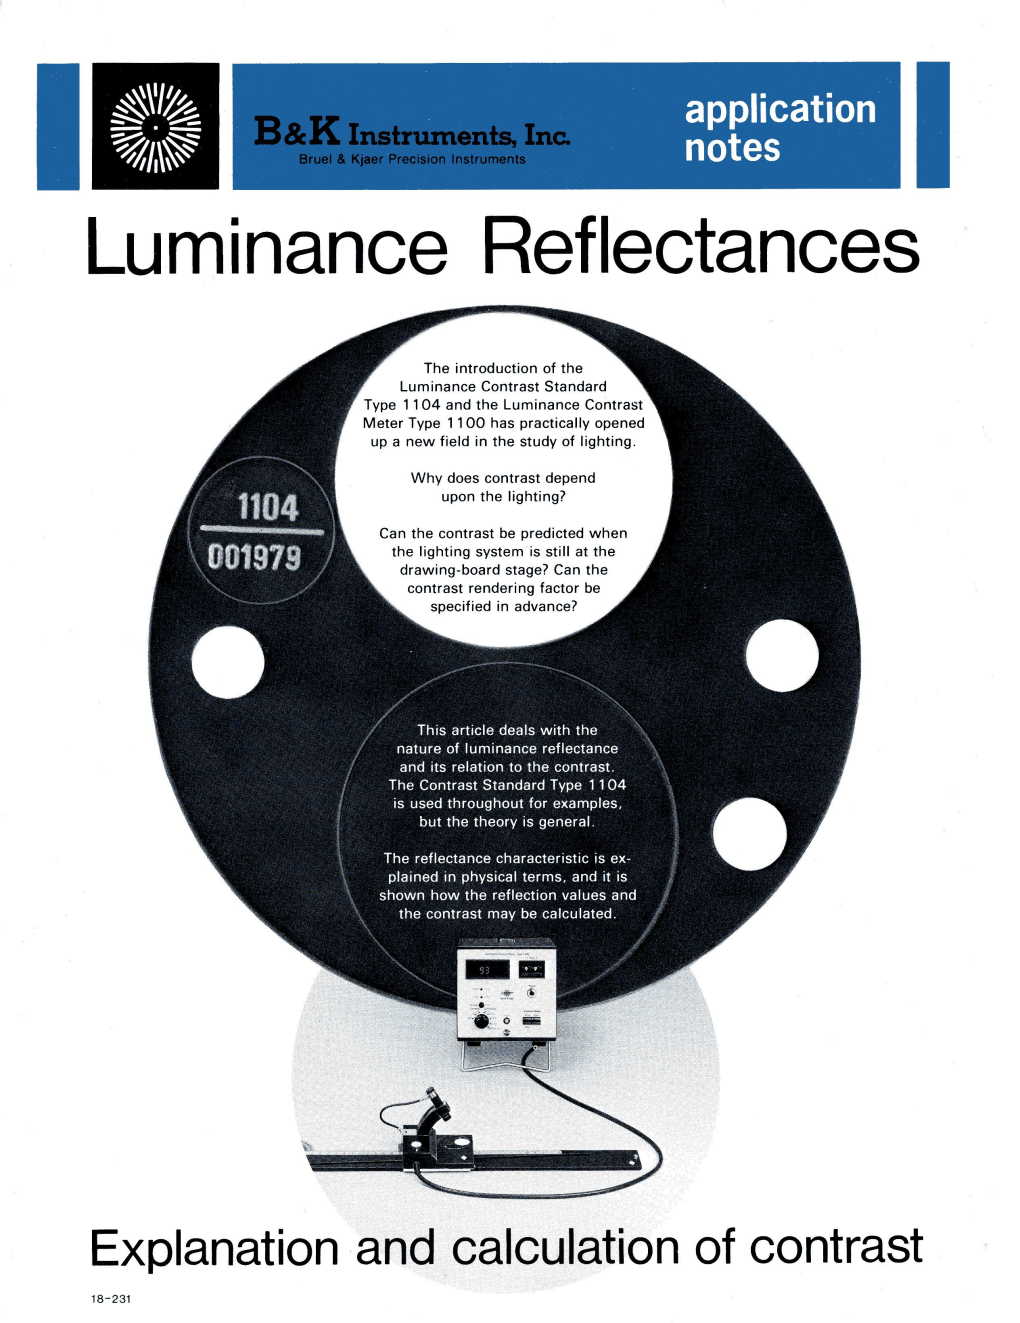 Luminance Reflectances Explanation and Calculation of Contrast